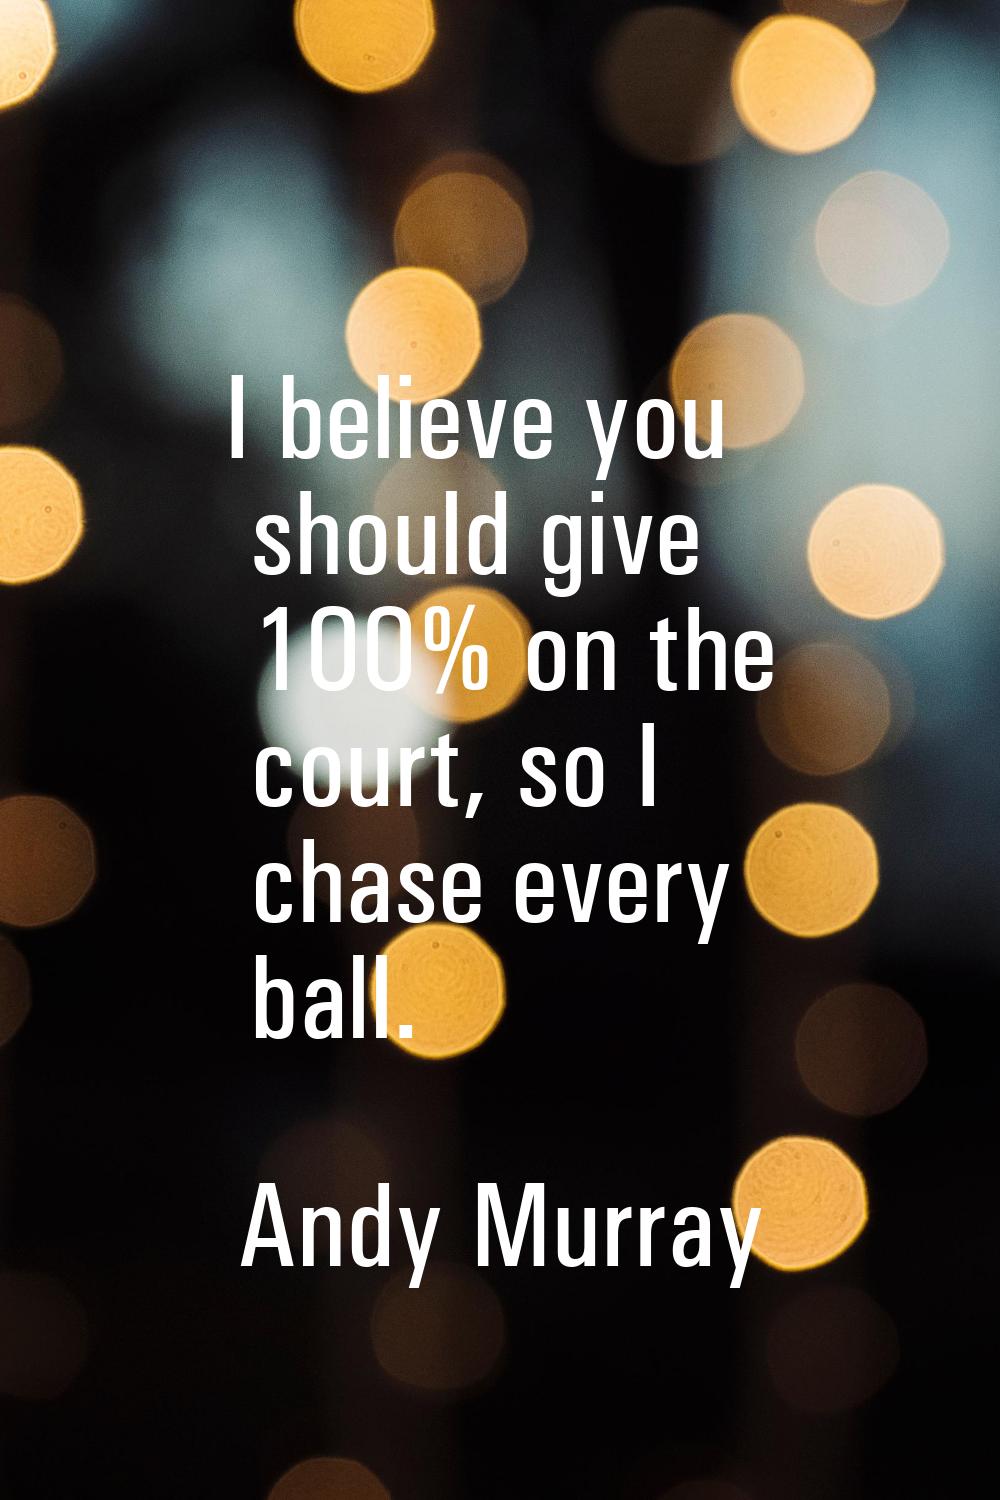 I believe you should give 100% on the court, so I chase every ball.